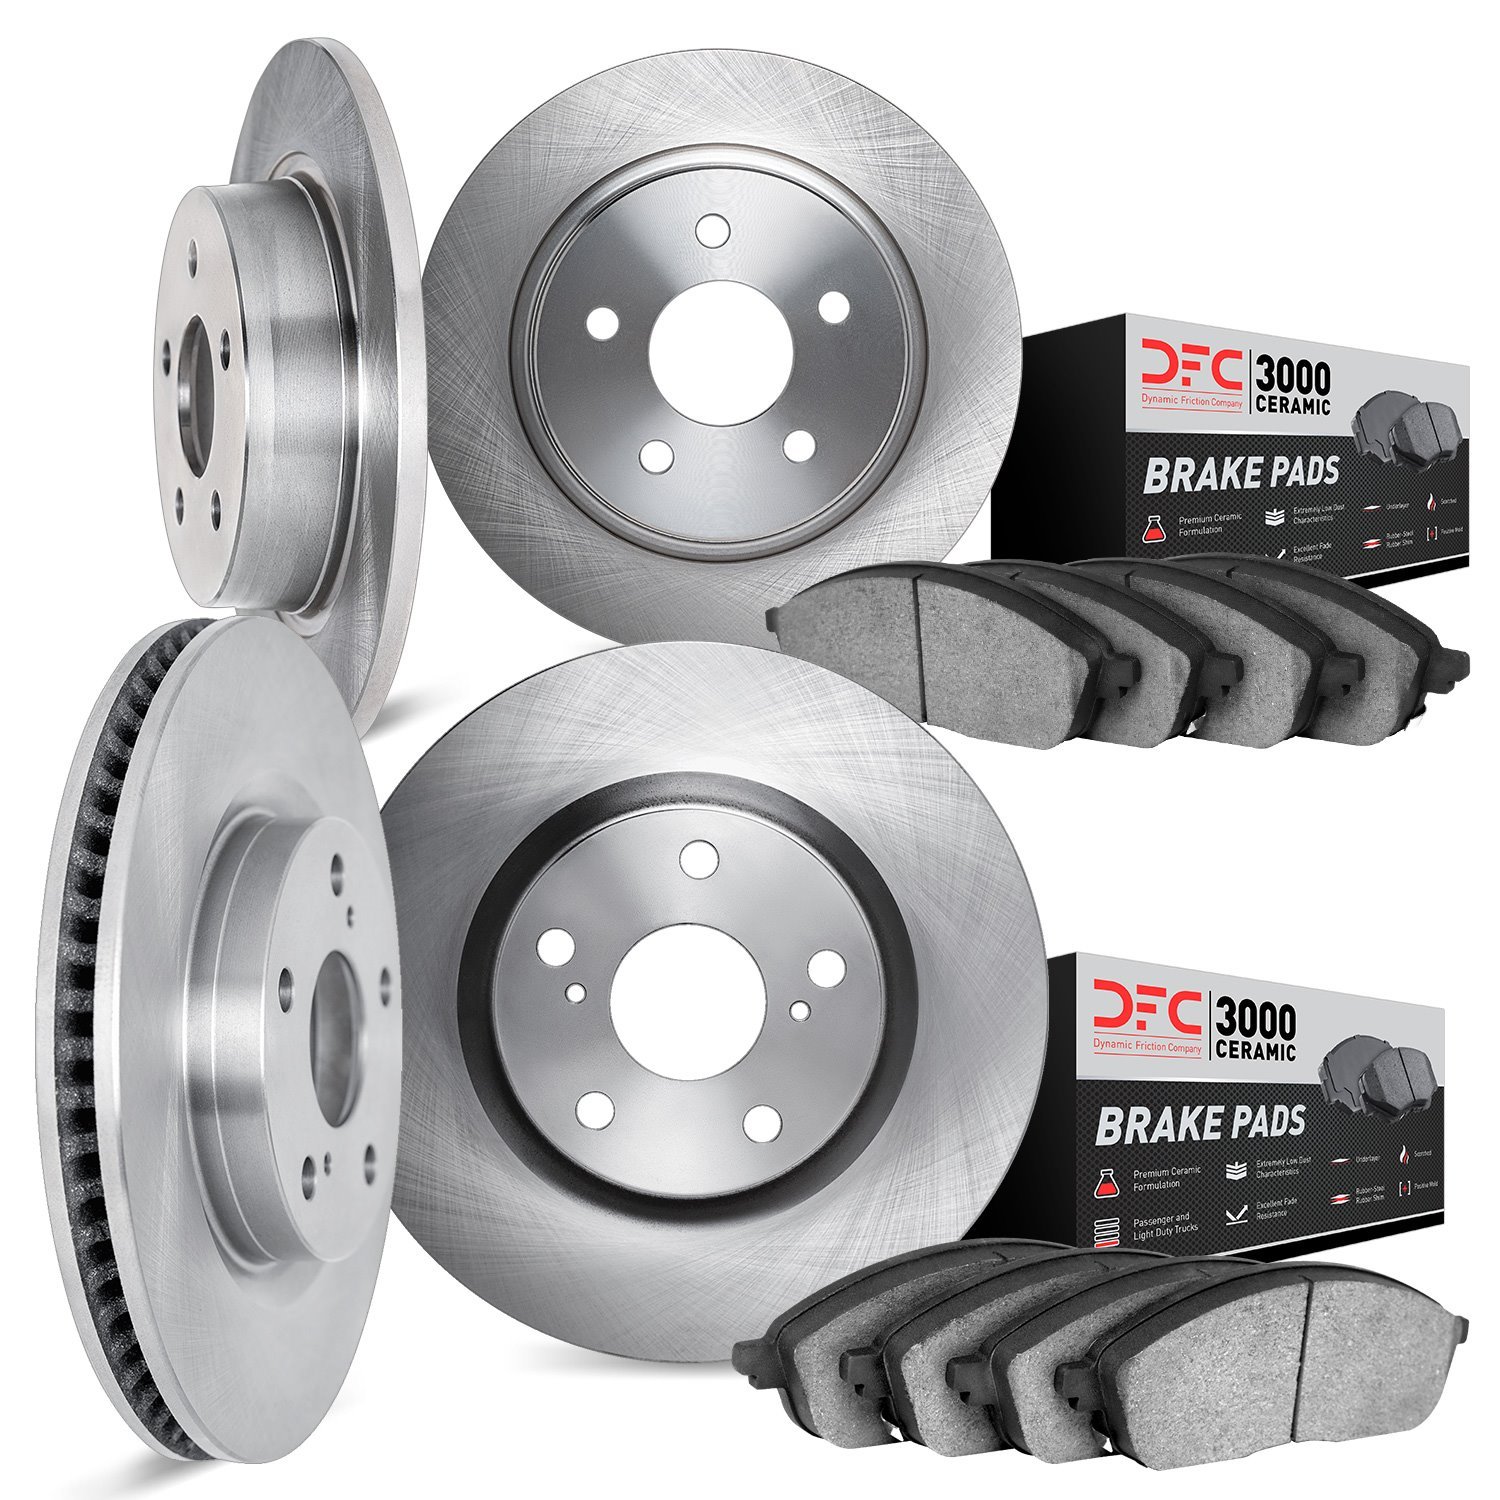 6304-92010 Brake Rotors with 3000-Series Ceramic Brake Pads Kit, 2009-2015 Lexus/Toyota/Scion, Position: Front and Rear